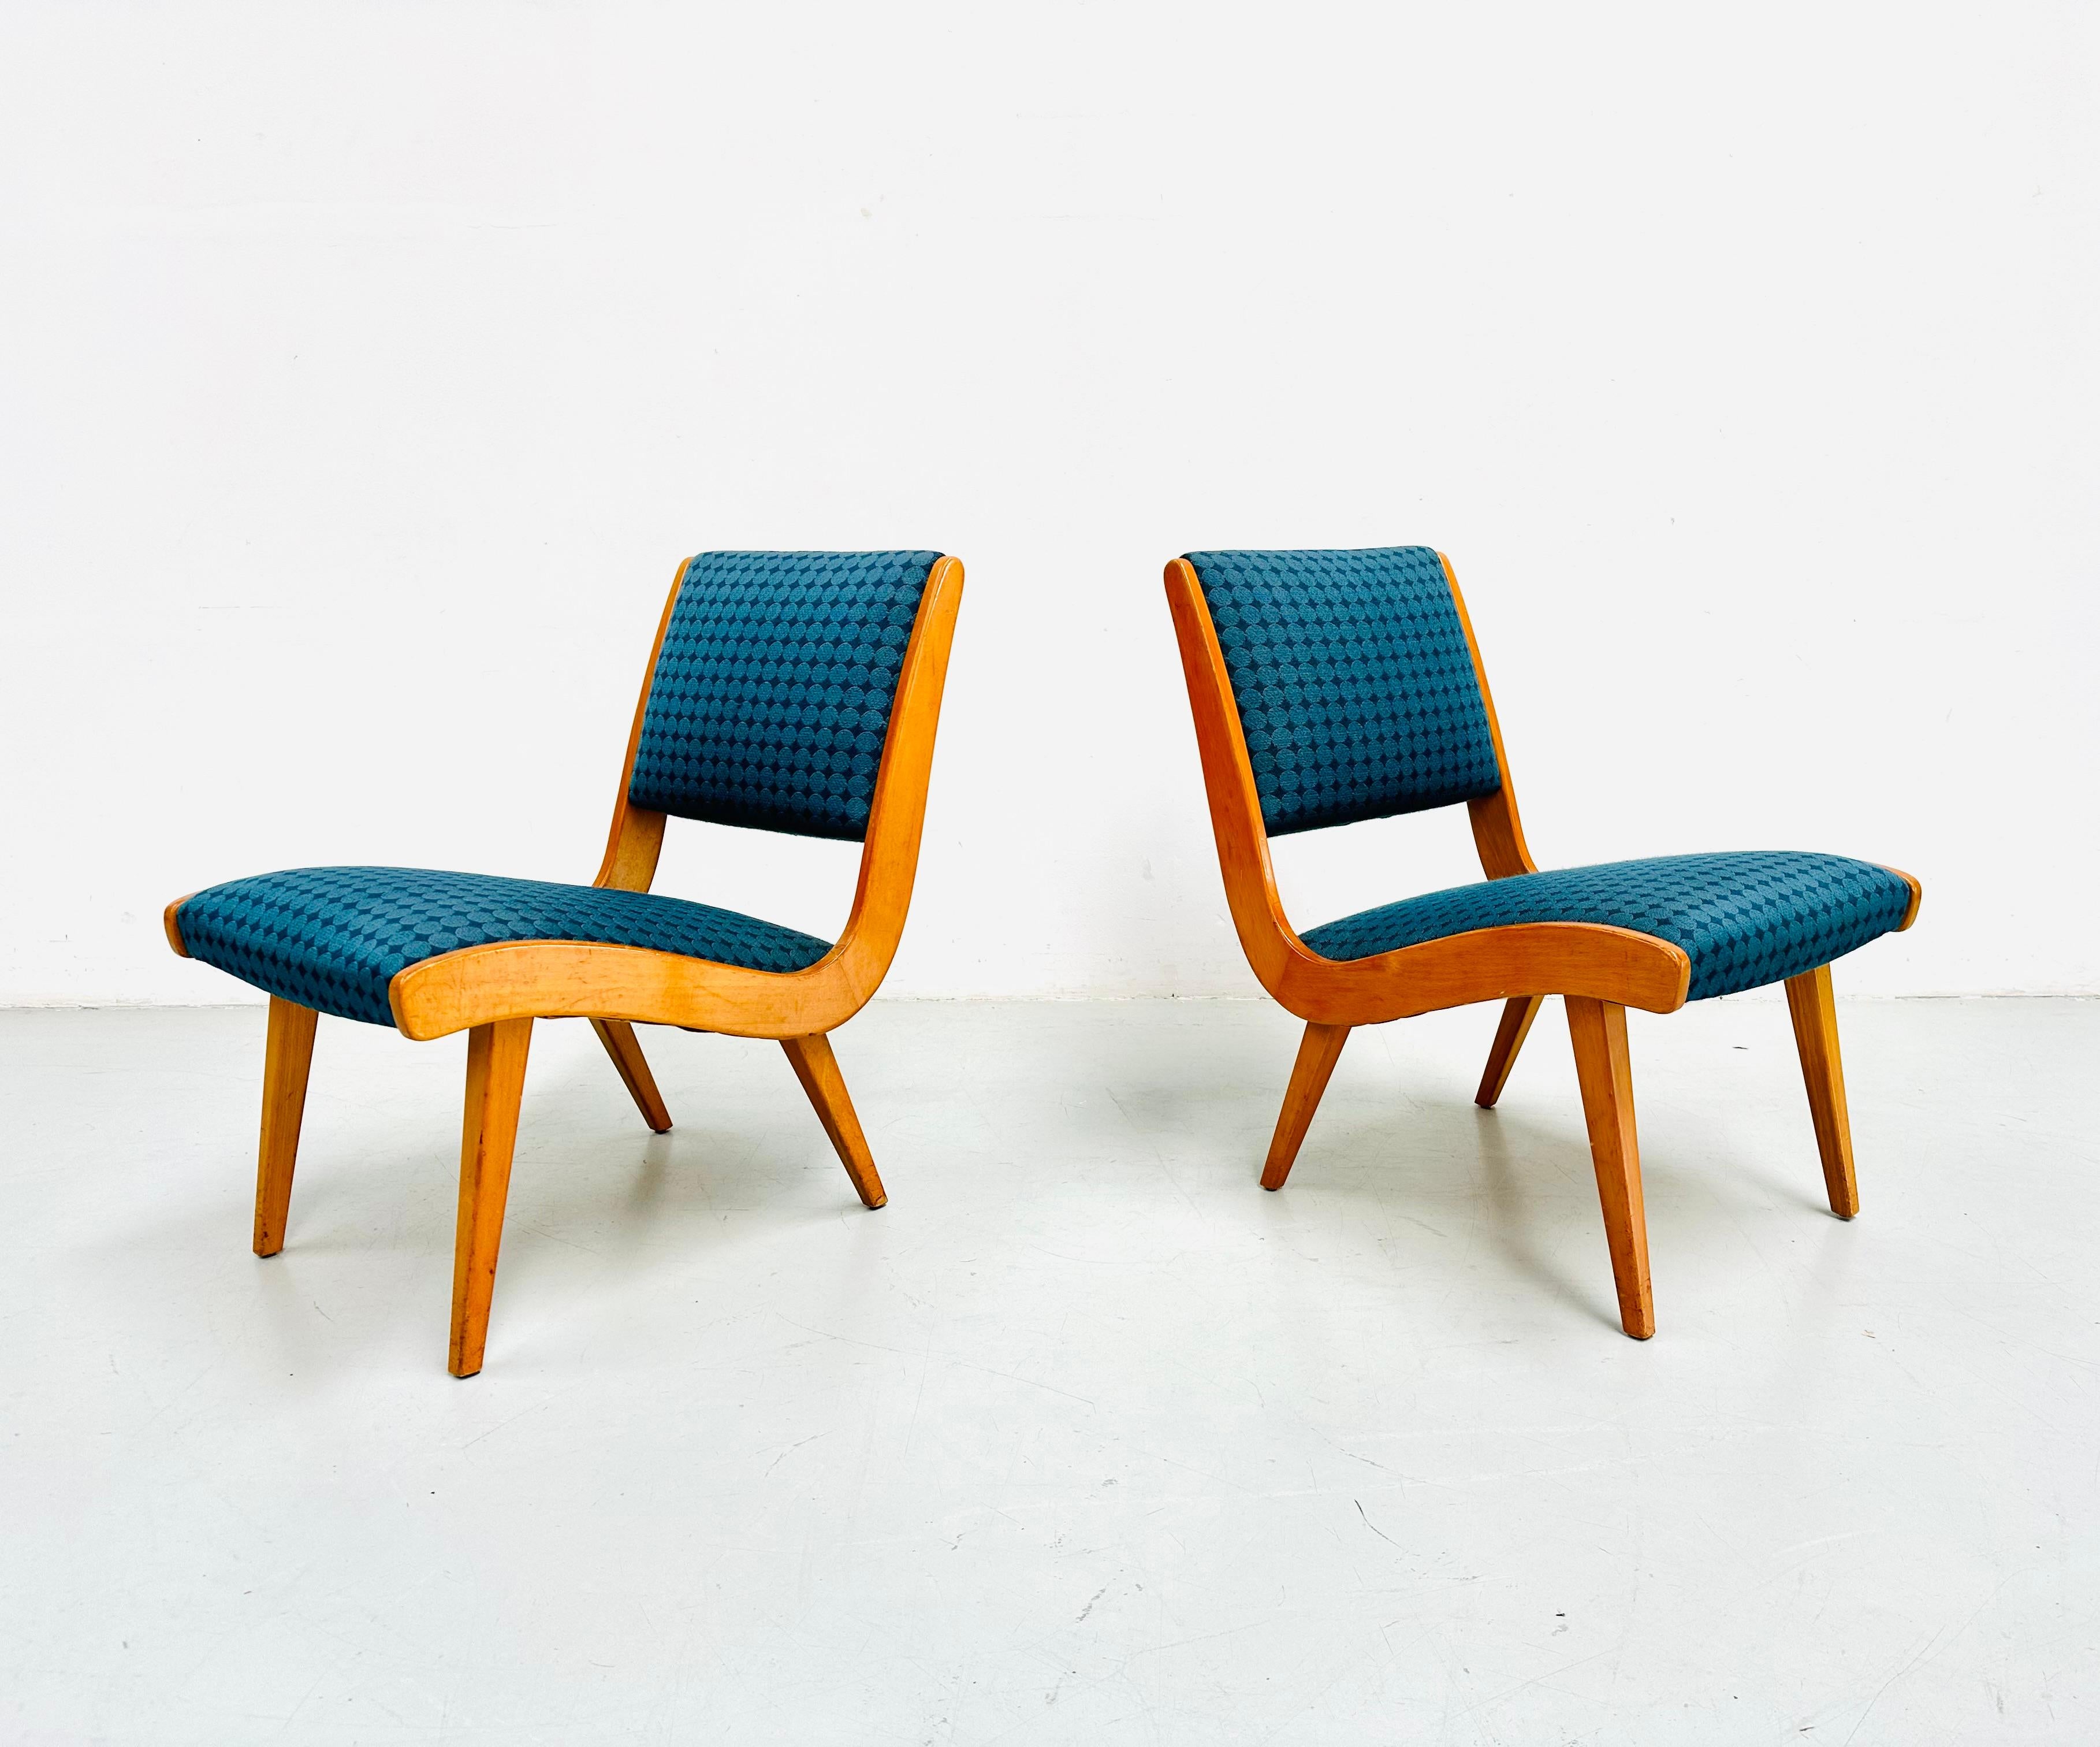 1950s Rare Set Vostra Chairs Numbered & Original Fabric by Jens Risom for Knoll. en vente 1